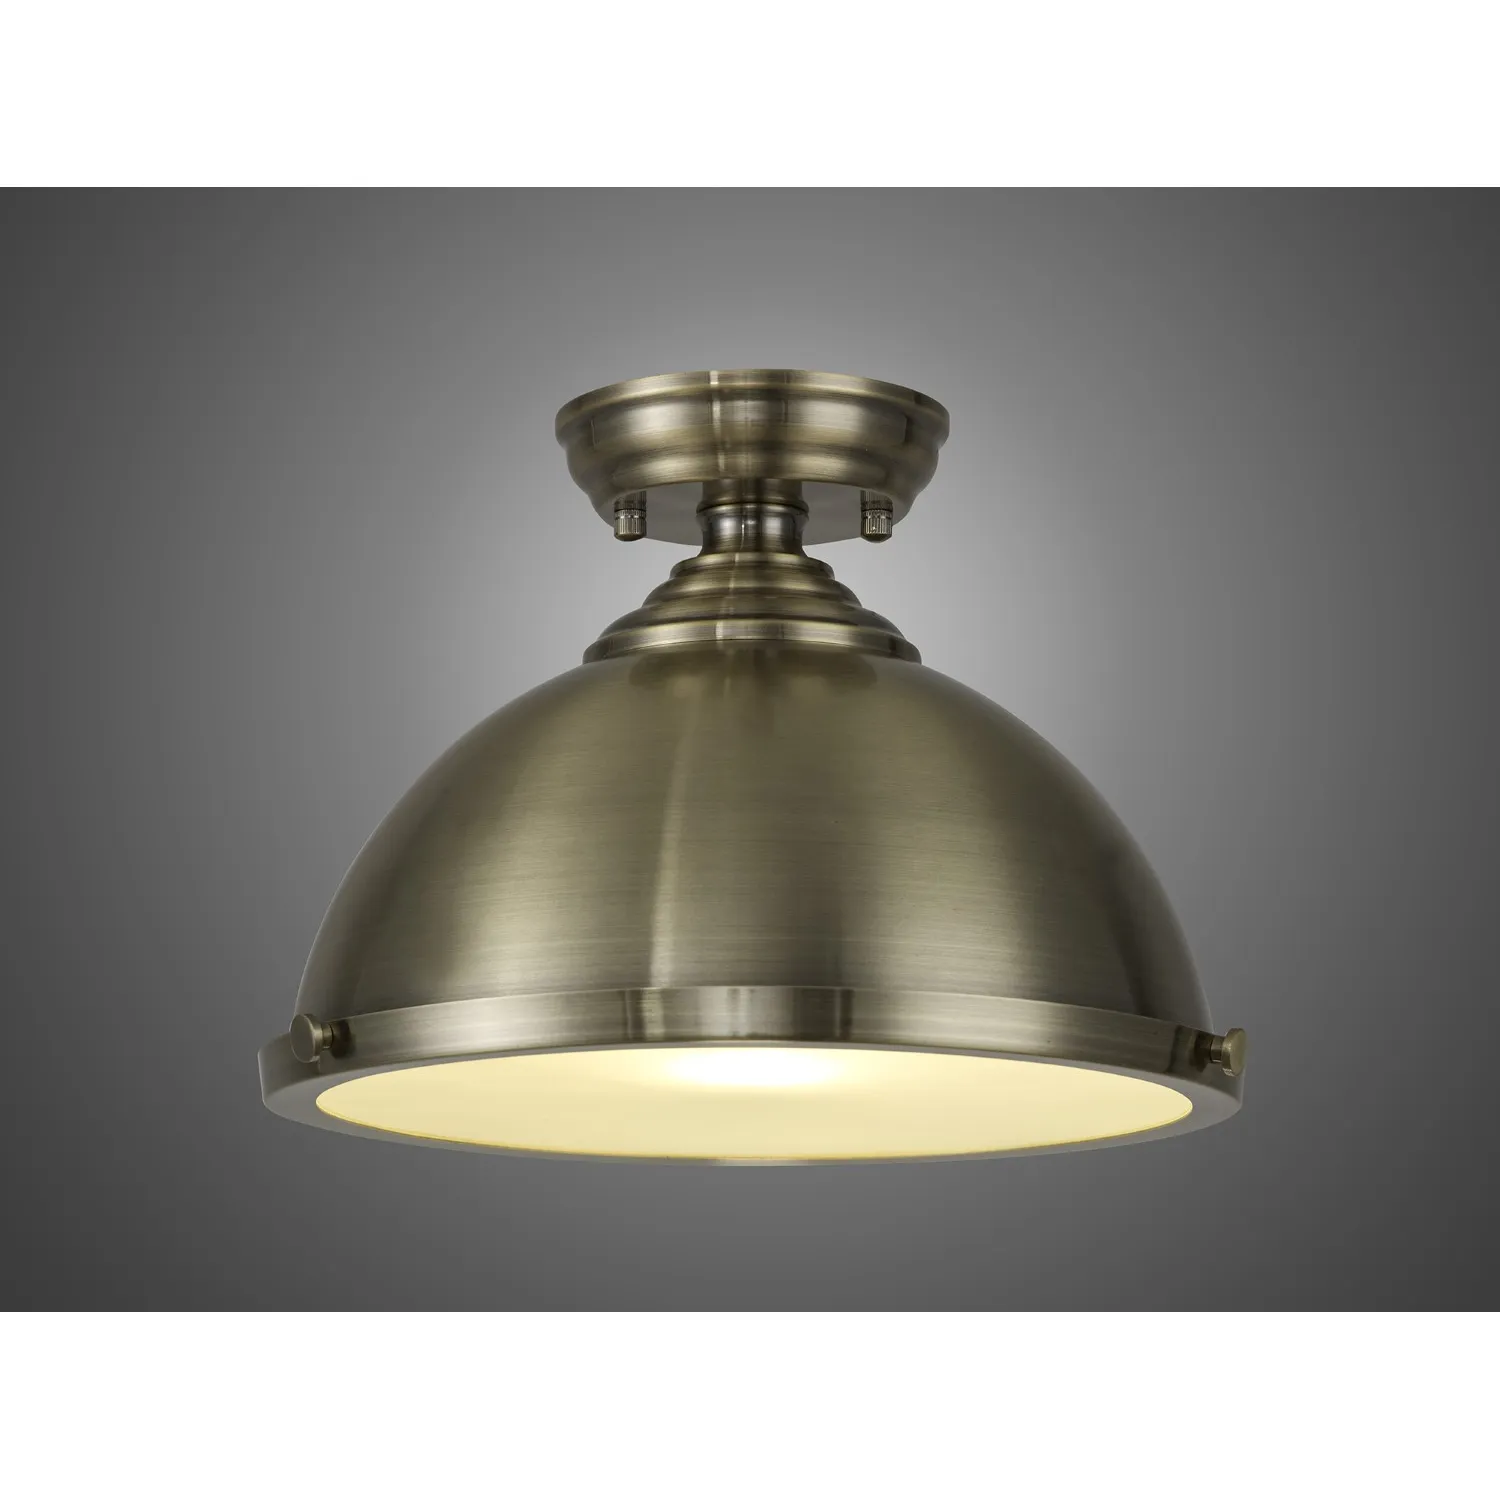 Sandy 31cm Flush Ceiling Fitting, 1 x E27, Antique Brass Frosted Glass